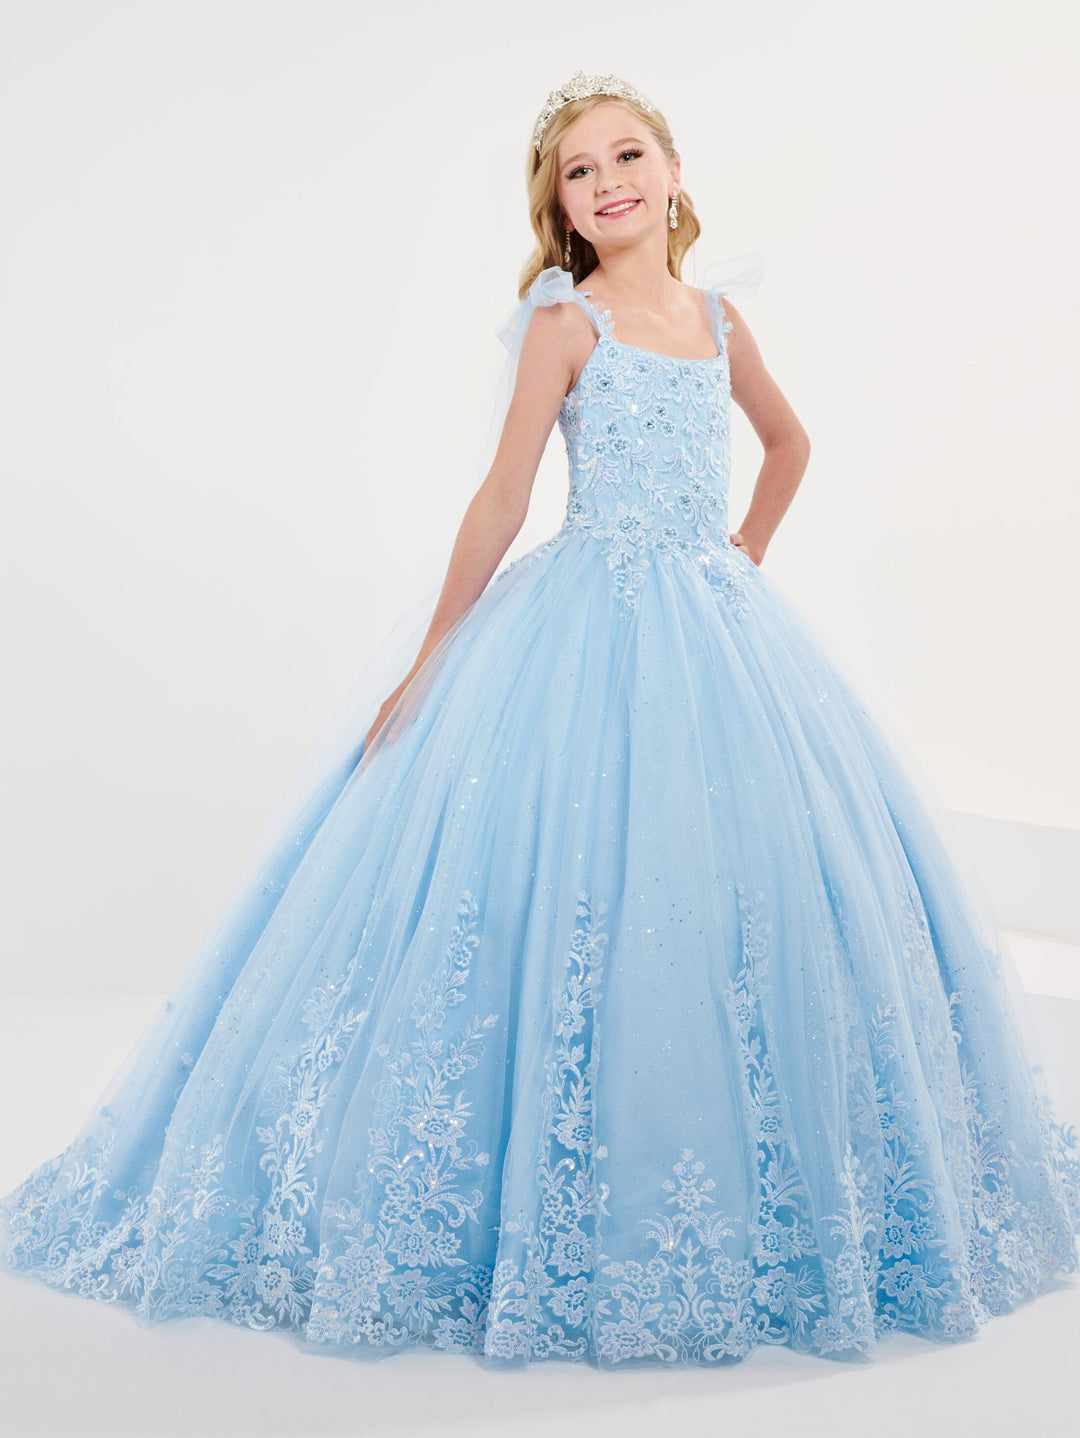 Girls Embroidered Sleeveless Gown by Tiffany Princess 13701